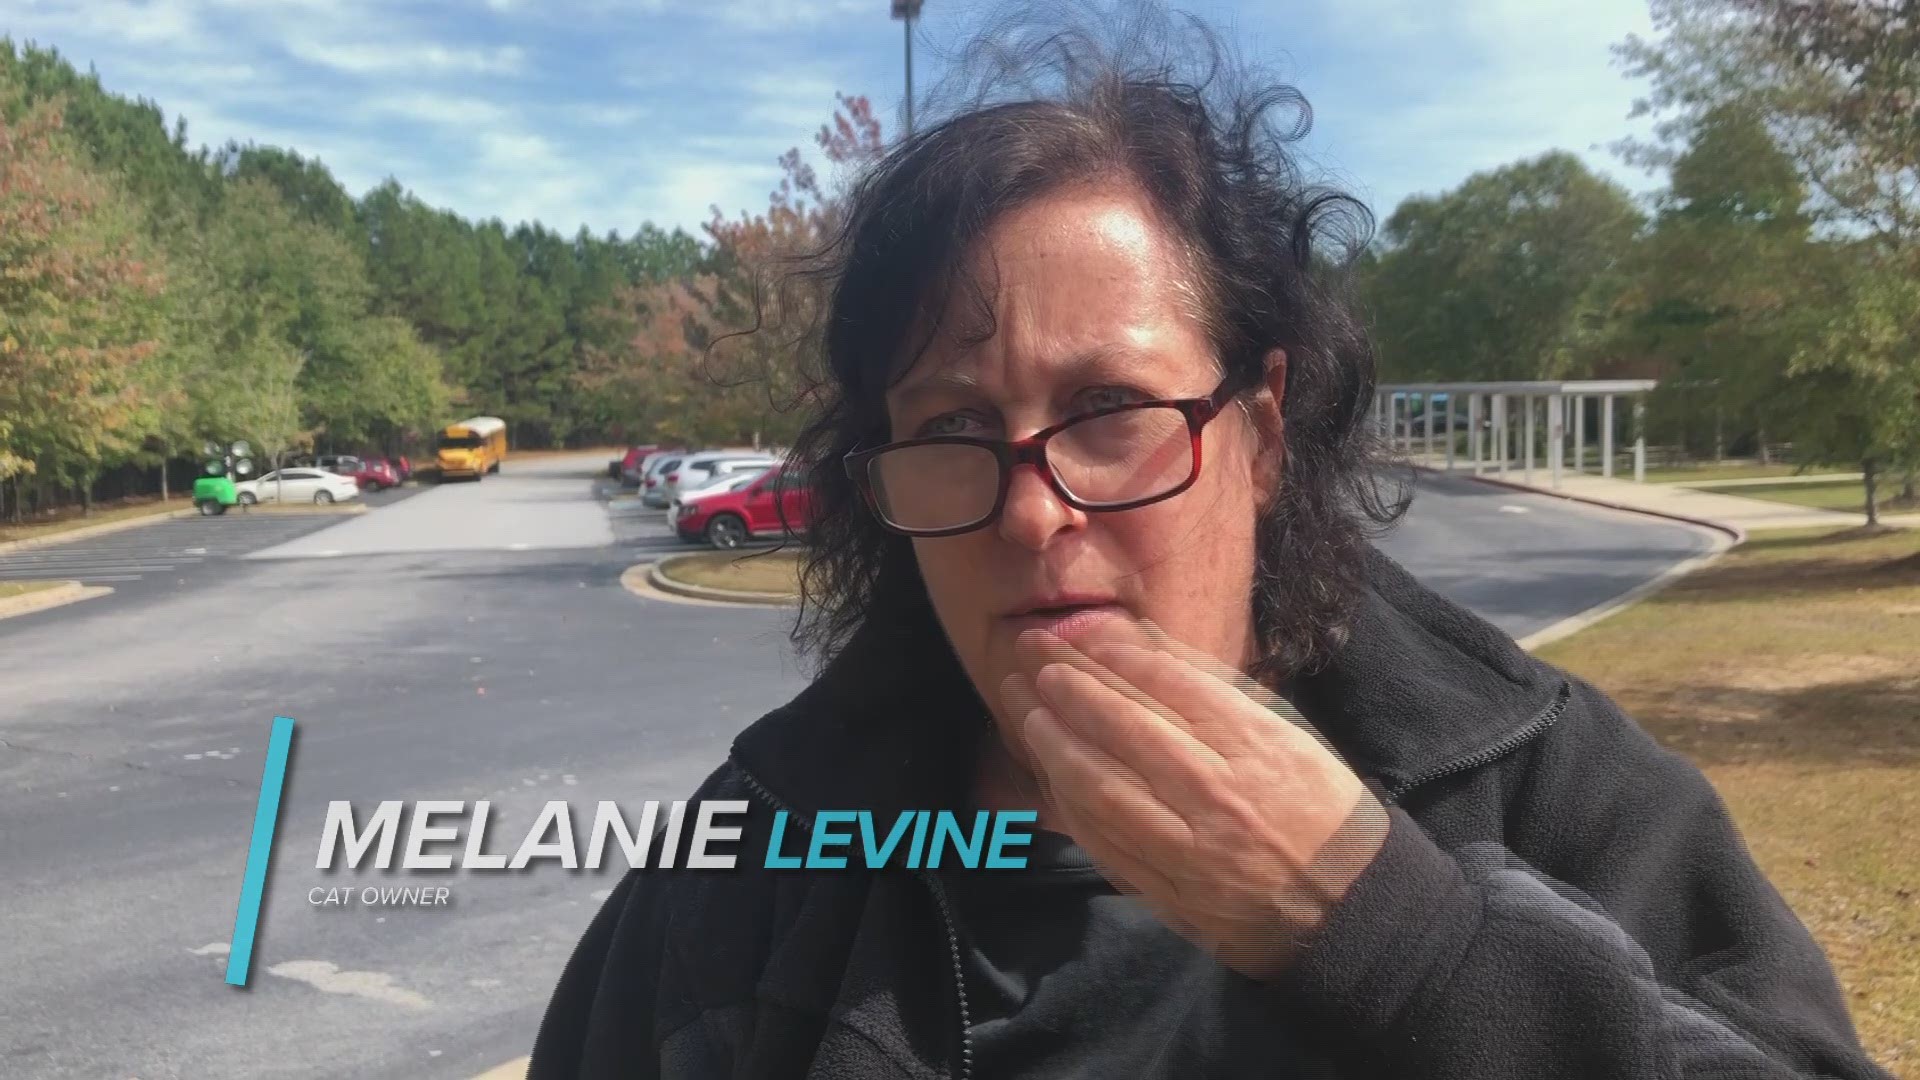 Melanie Levine's cat, Eli, was killed by coyotes in east Atlanta. She wants her neighbors to be aware of the animals in her neighborhood.